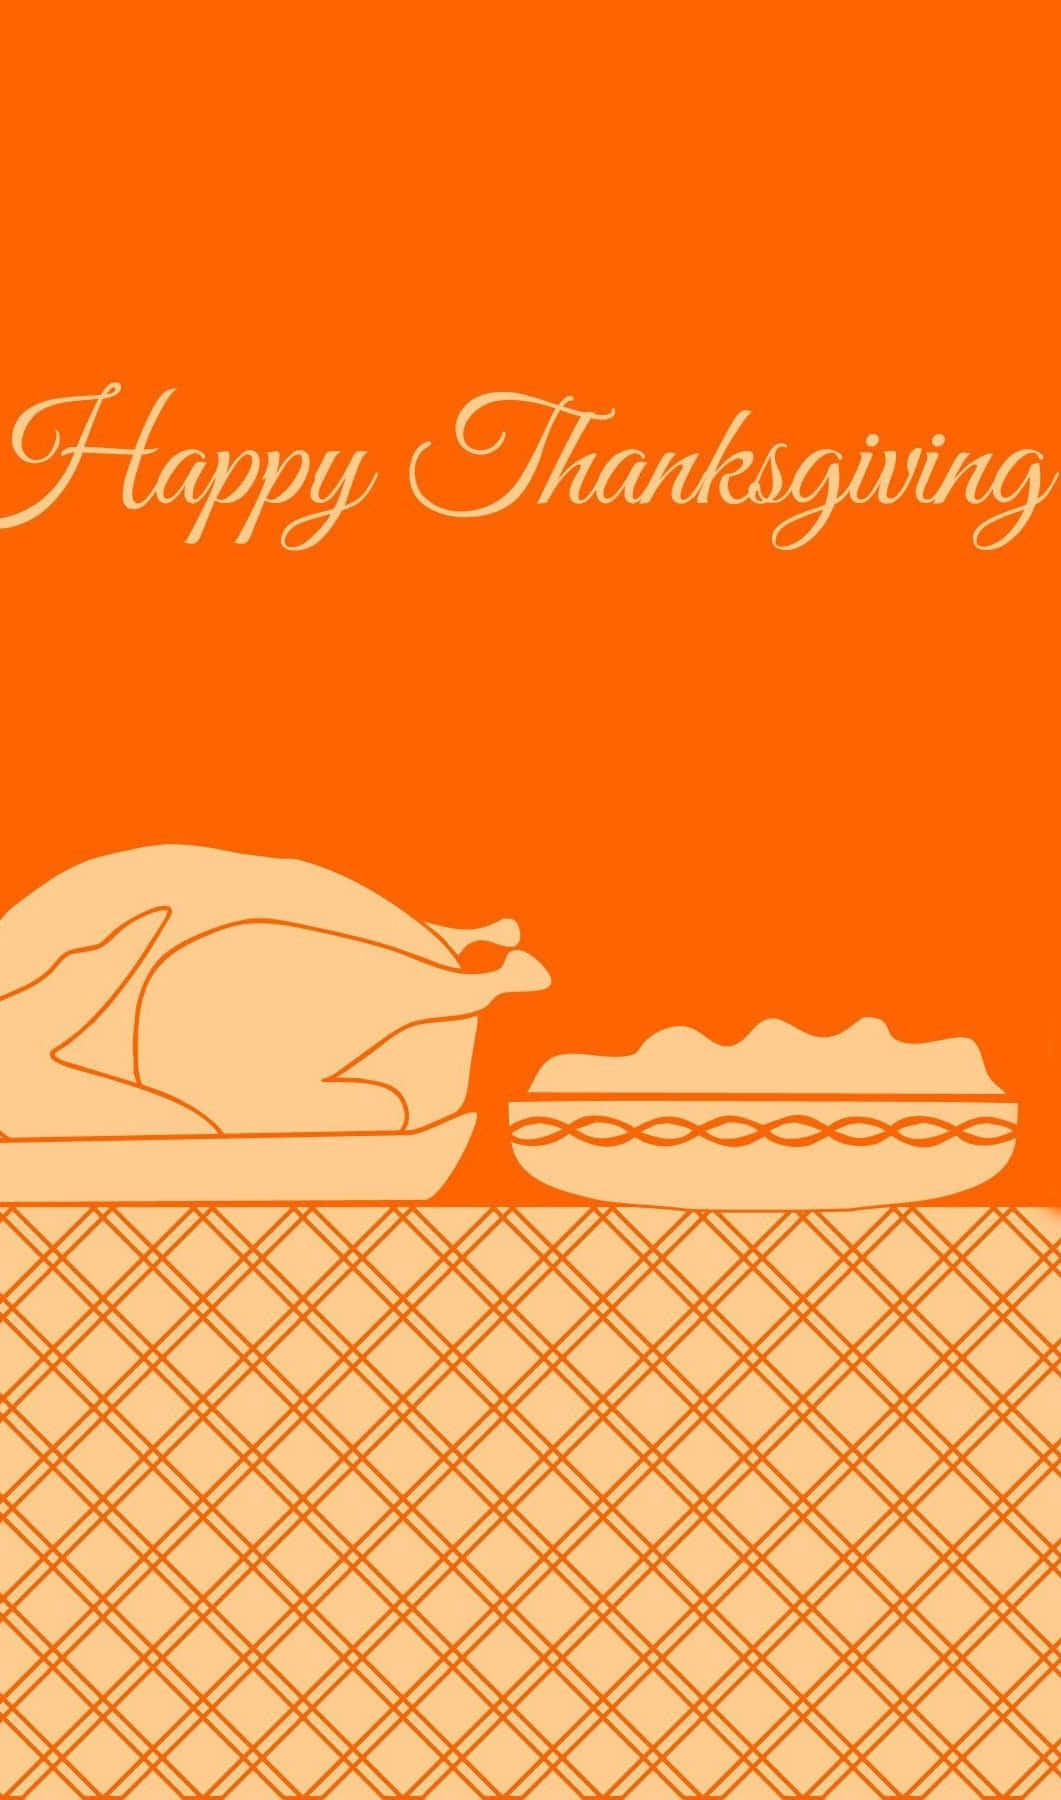 Enjoy Thanksgiving with your favorite people even if you’re miles apart. Wallpaper